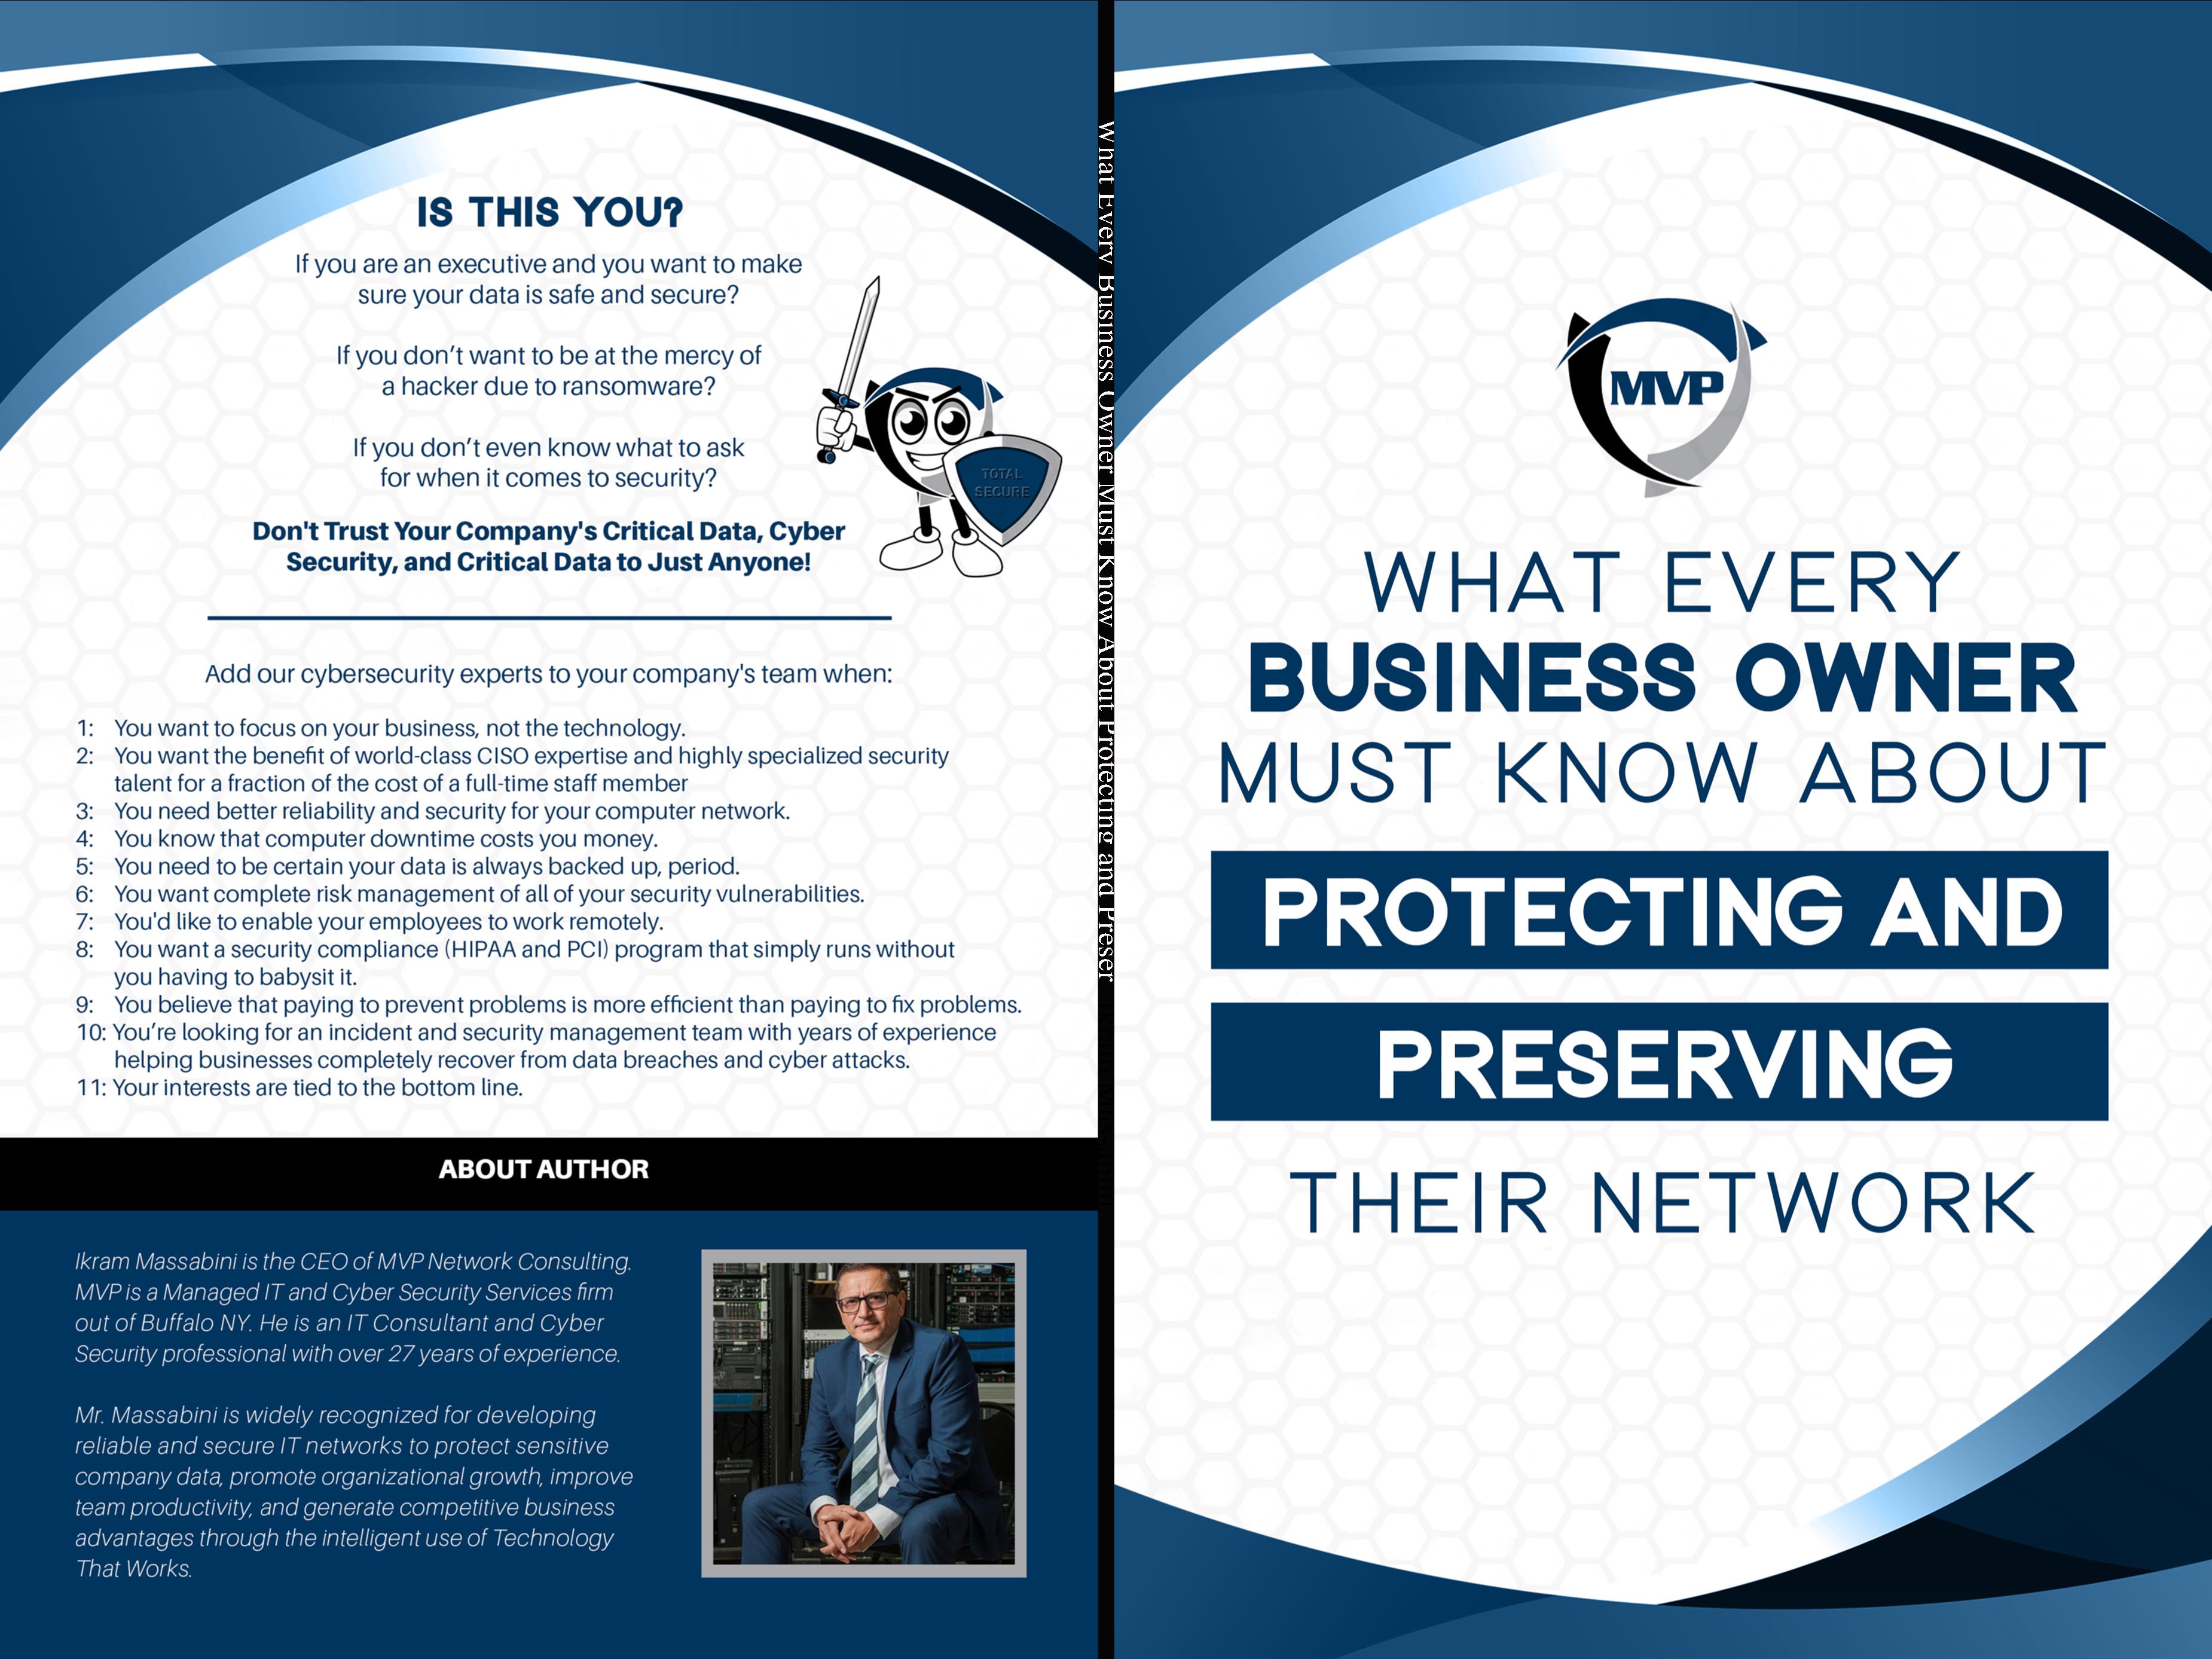 What Every Business Owner Must Know About Protecting and Preserving Their Company